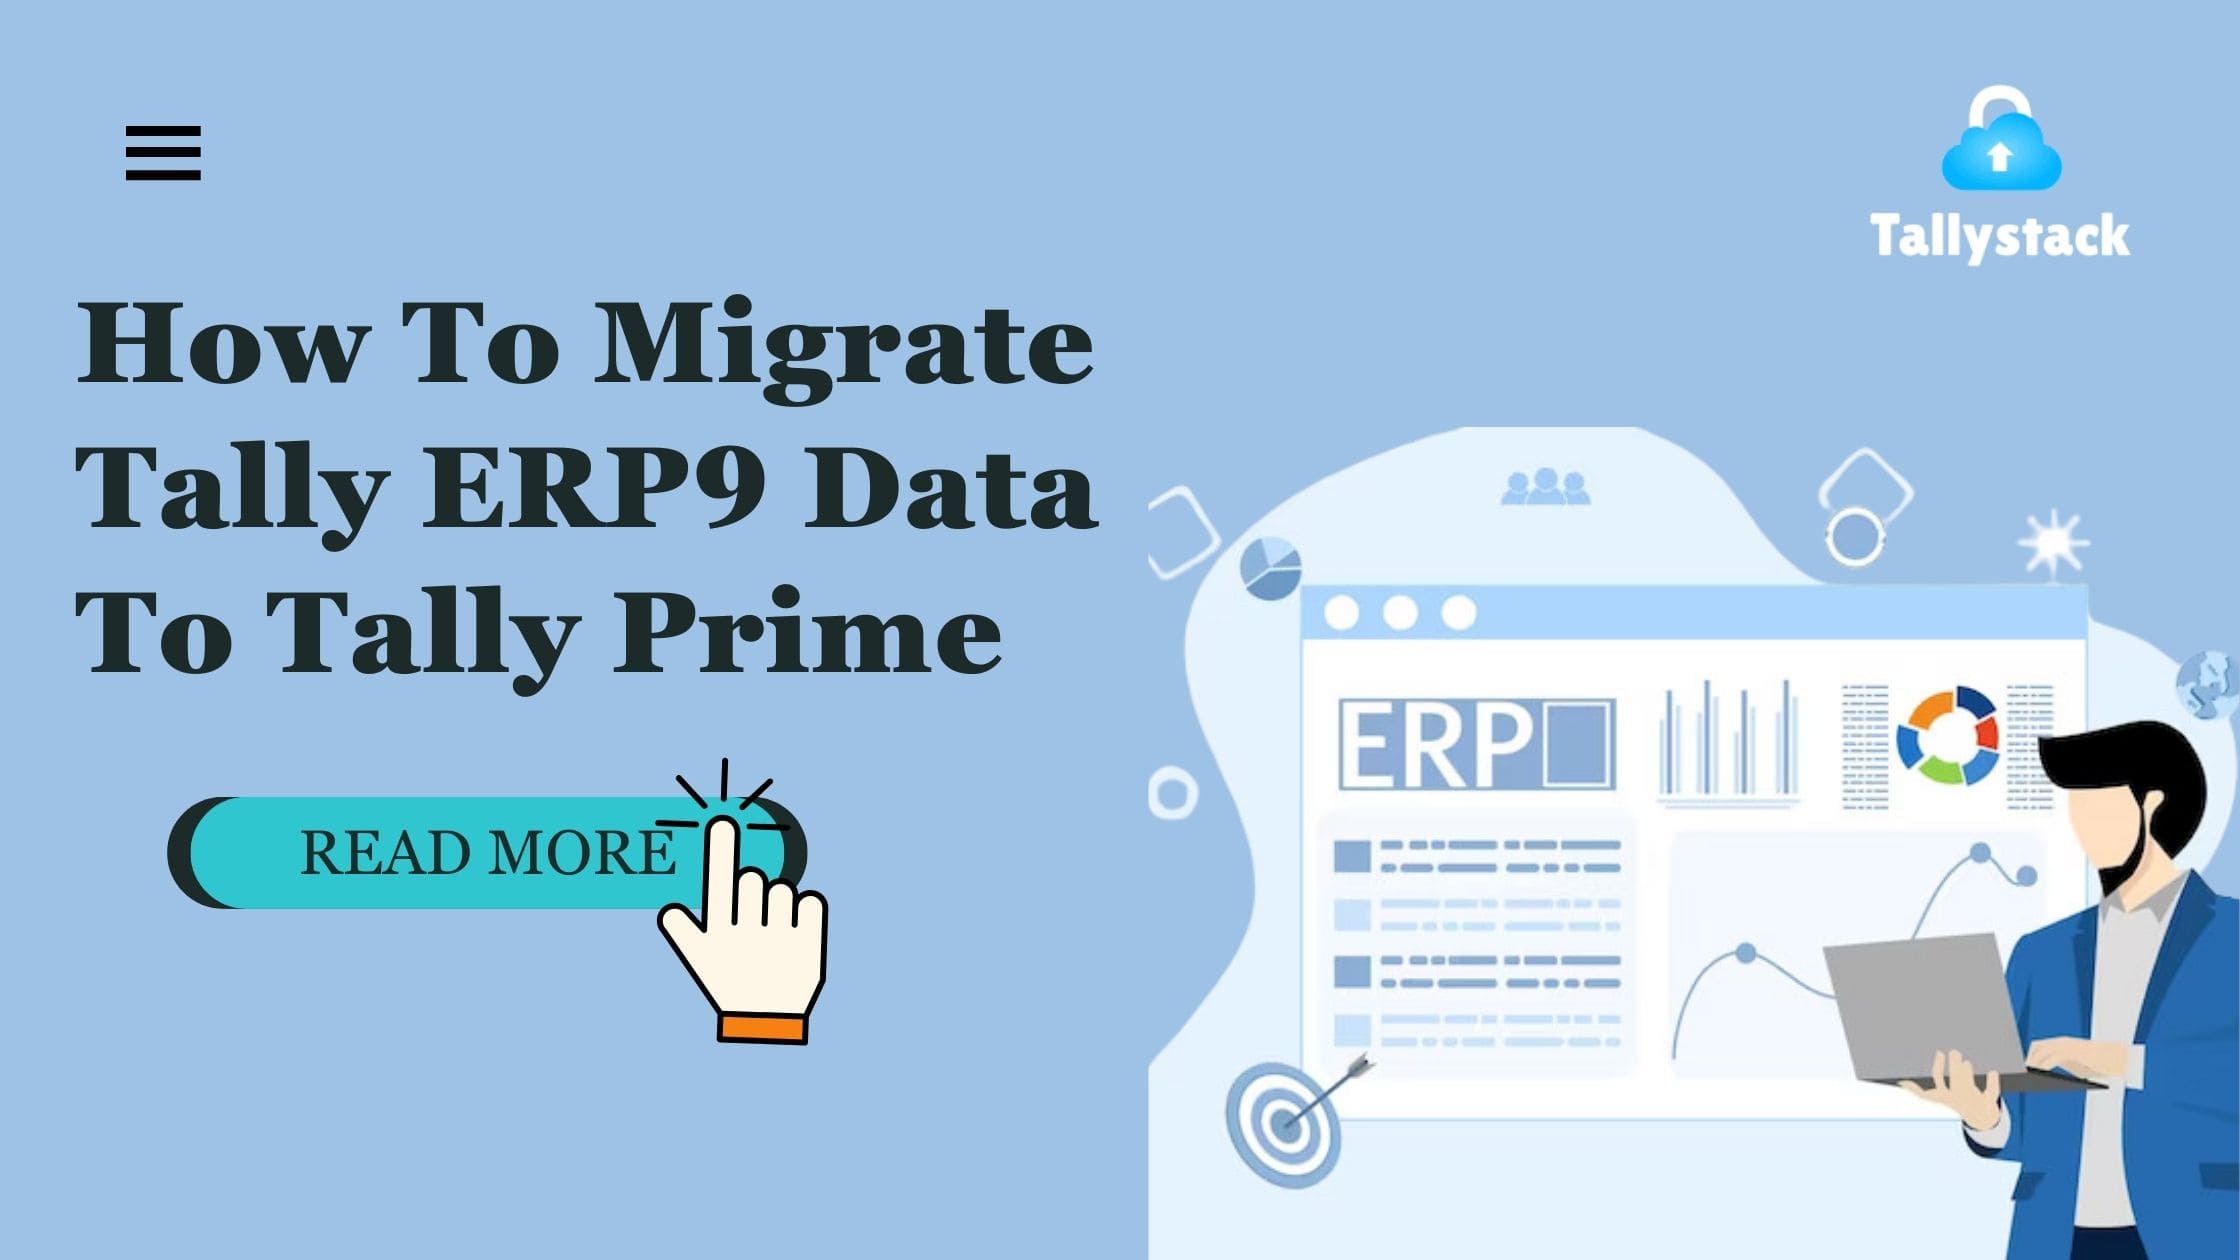 How to Migrate Tally ERP9 Data To Tally Prime.